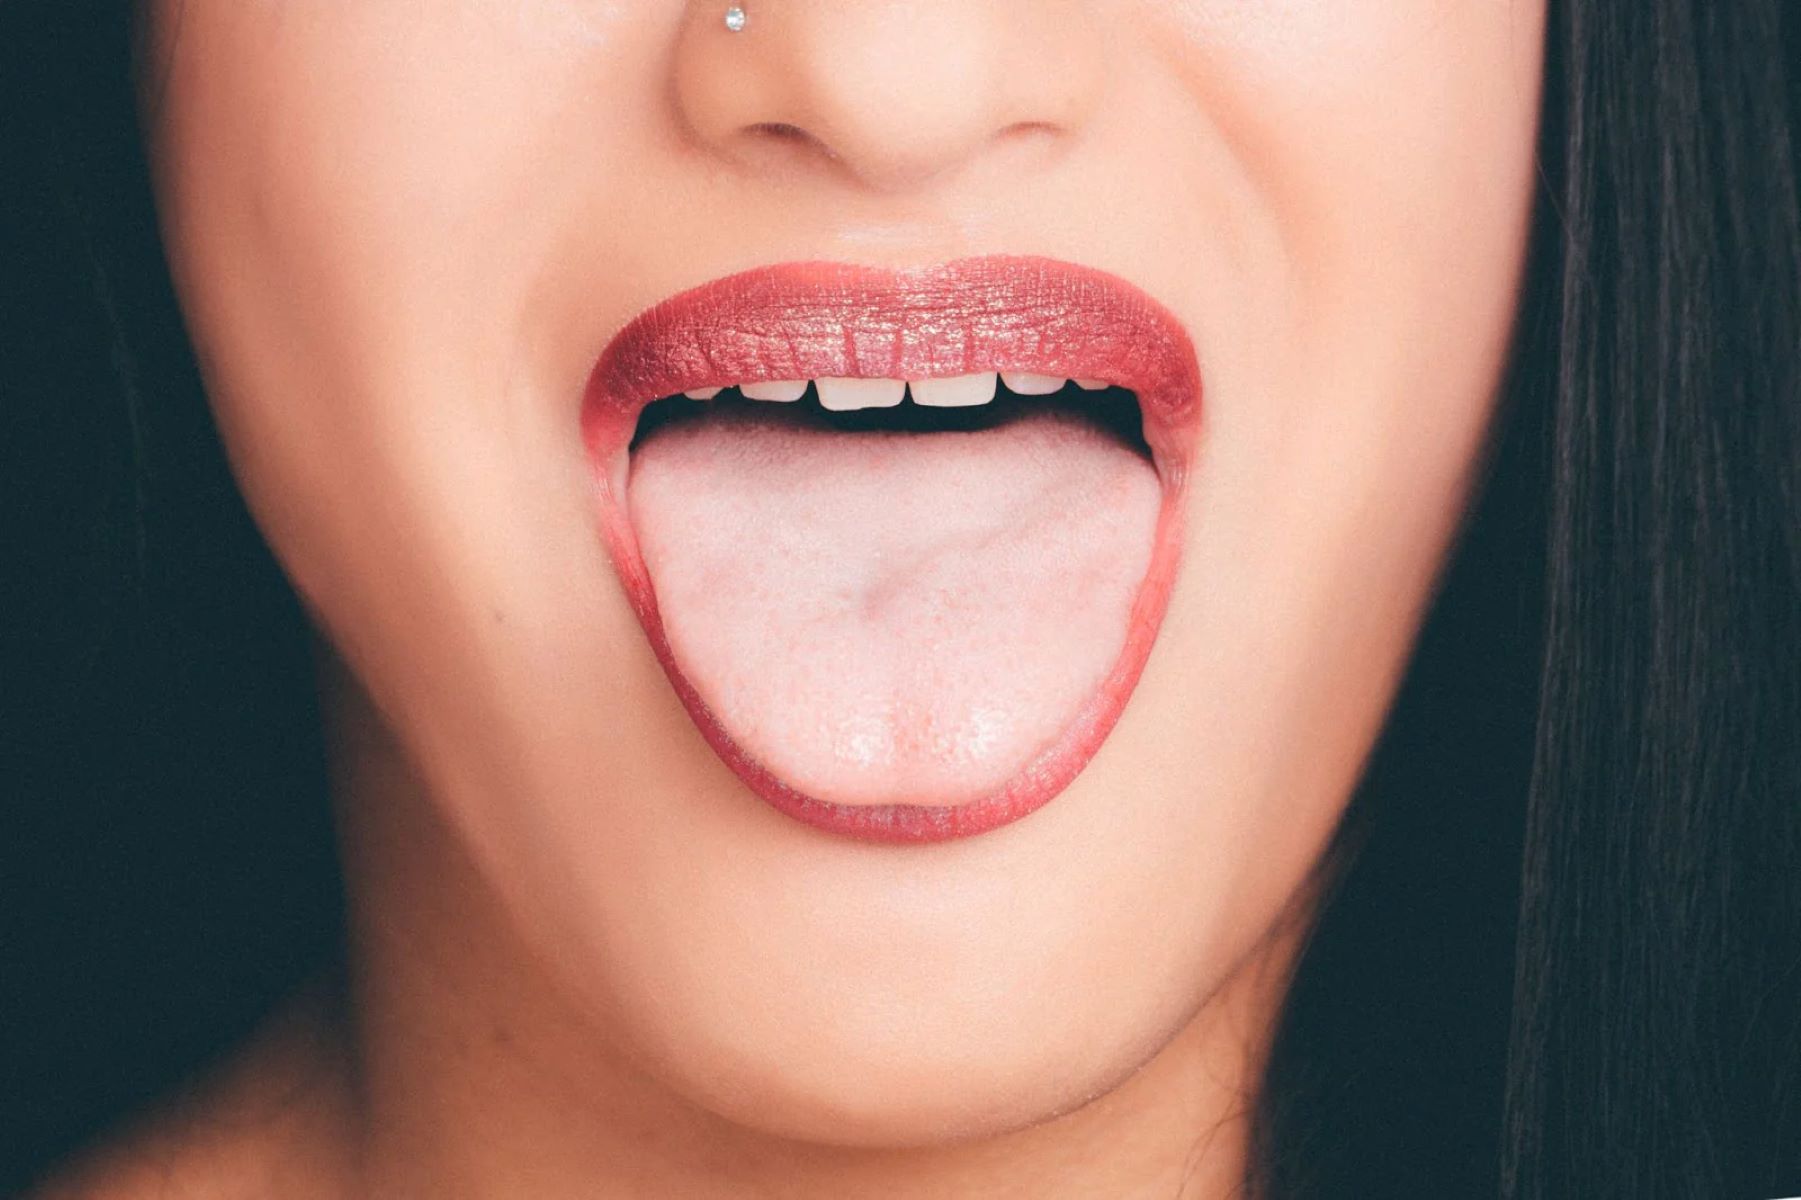 The Ultimate Solution To Stop Tongue Rubbing On Teeth